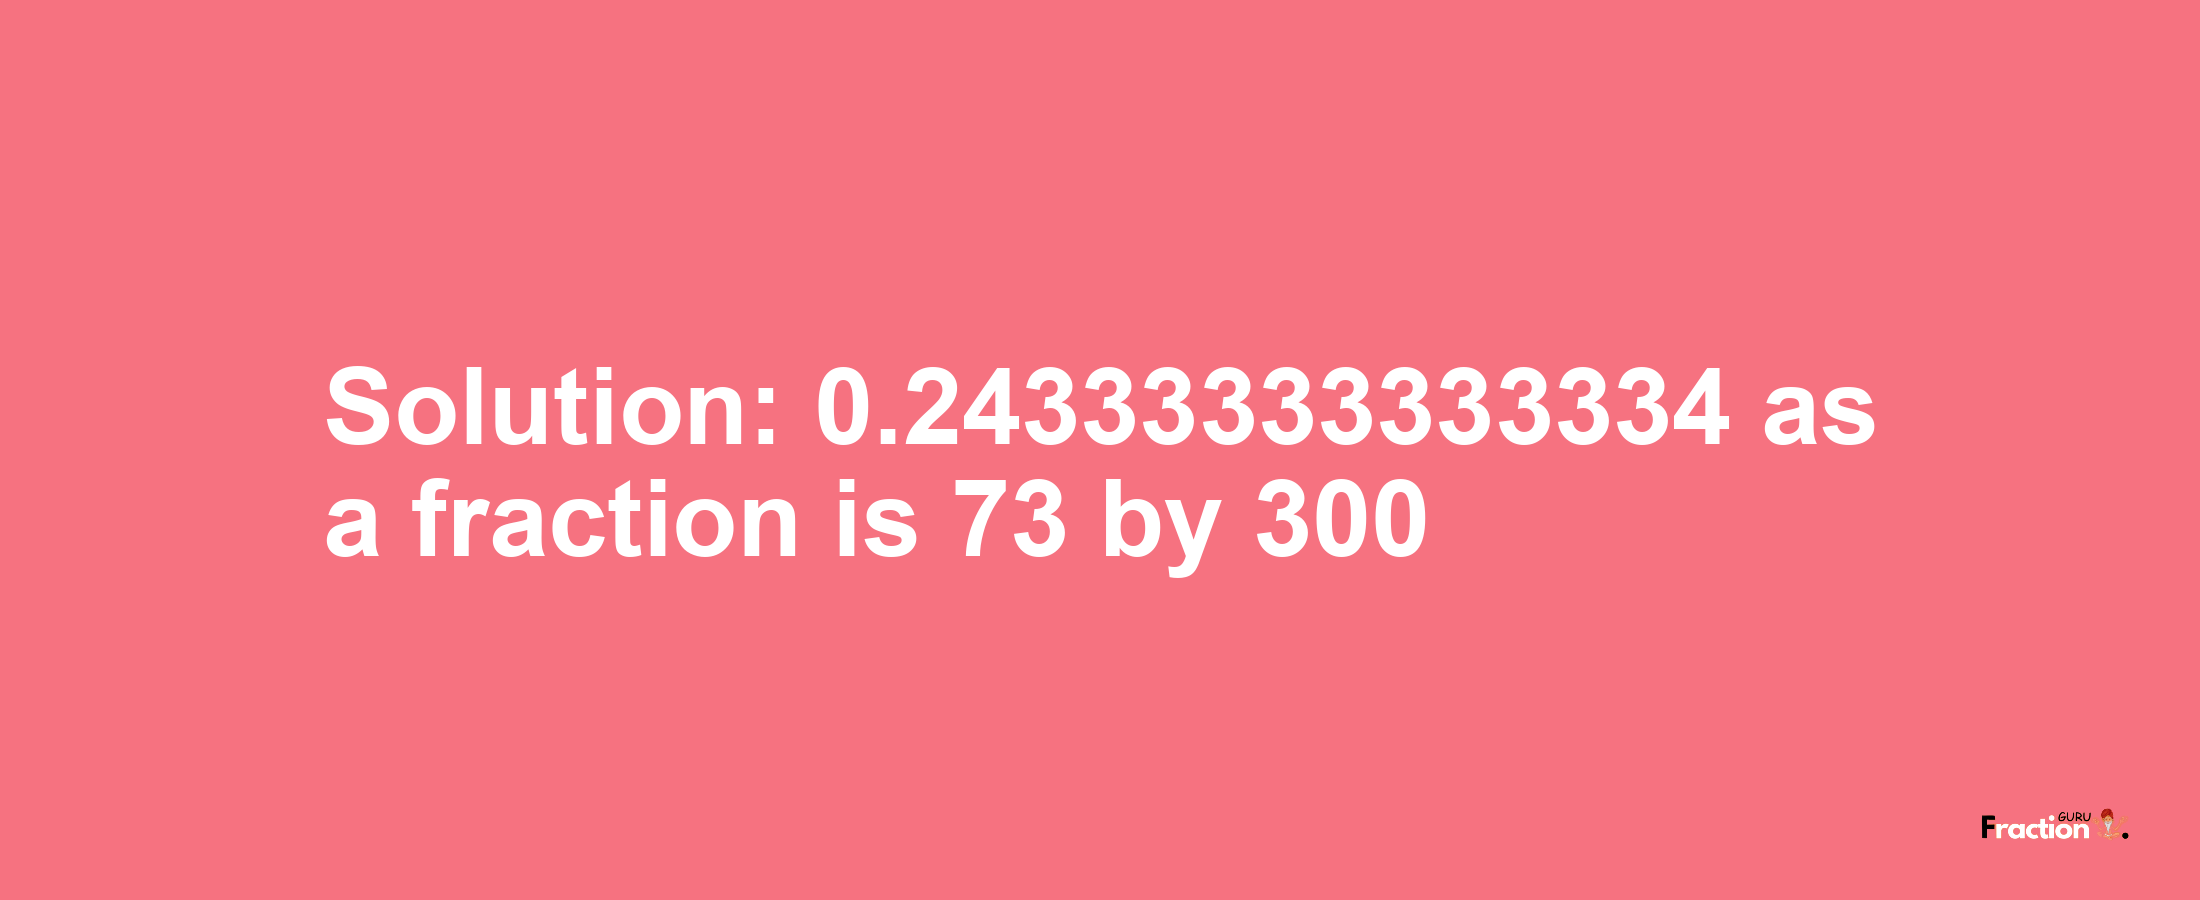 Solution:0.24333333333334 as a fraction is 73/300